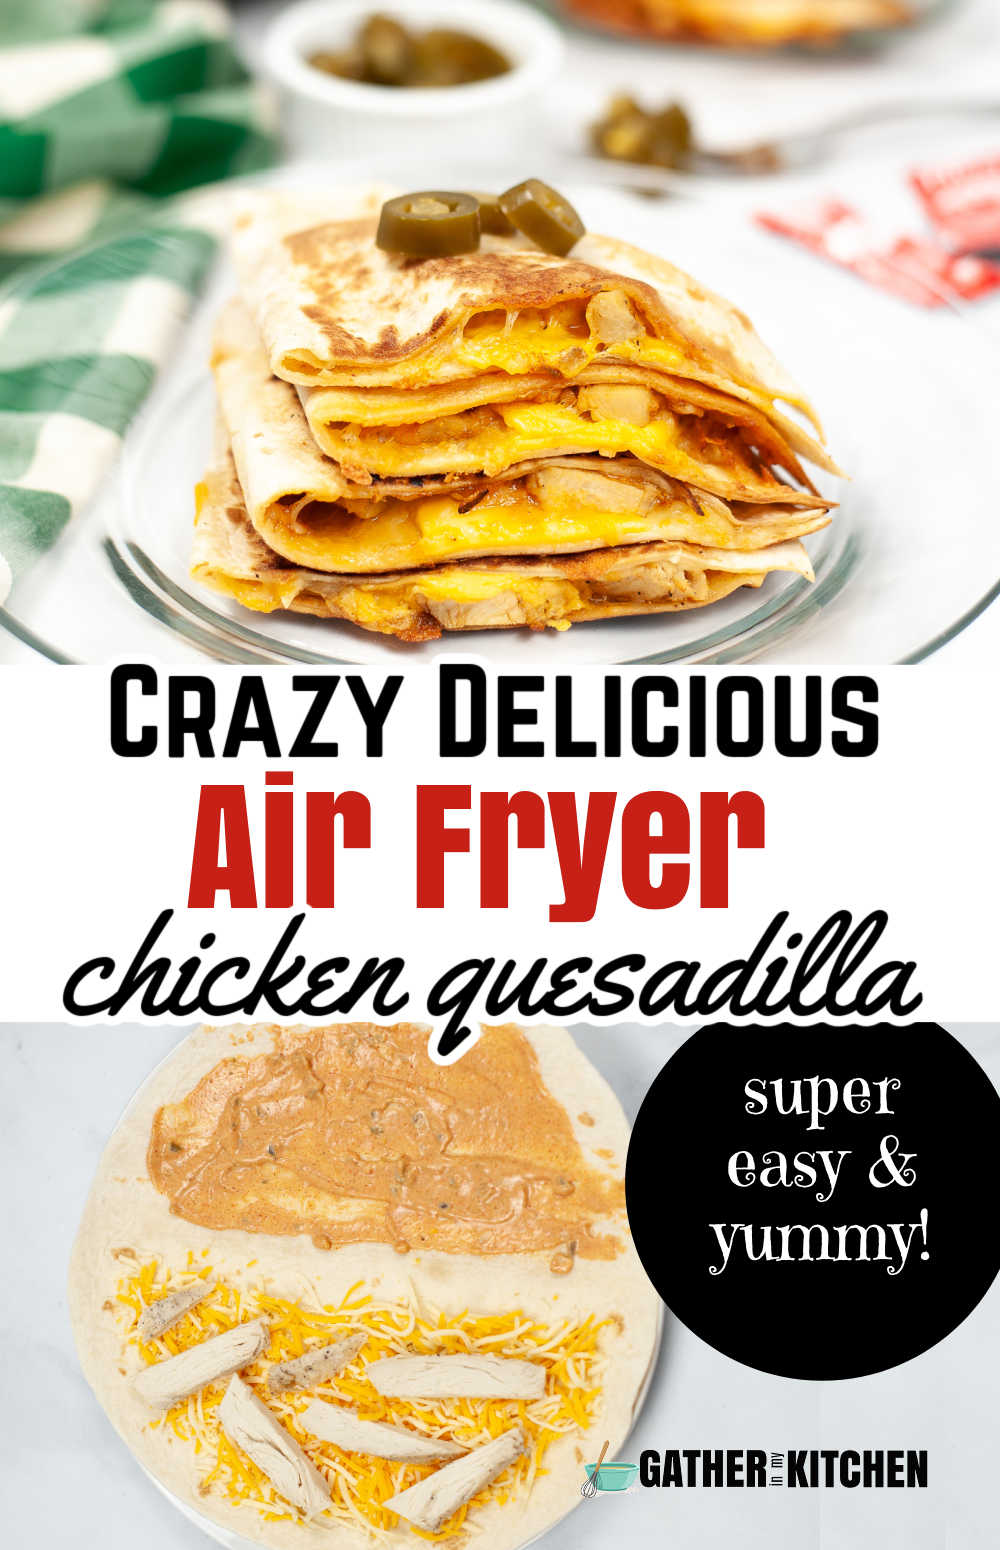 Pin image: top has a pile of copycat Taco Bell quesadillas in a pile, middle says "Crazy delicious air fryer chicken quesadilla: super easy & yummy" and bottom has a tortilla with copycat taco bell quesadilla sauce on one side and cheese and chicken on the other.